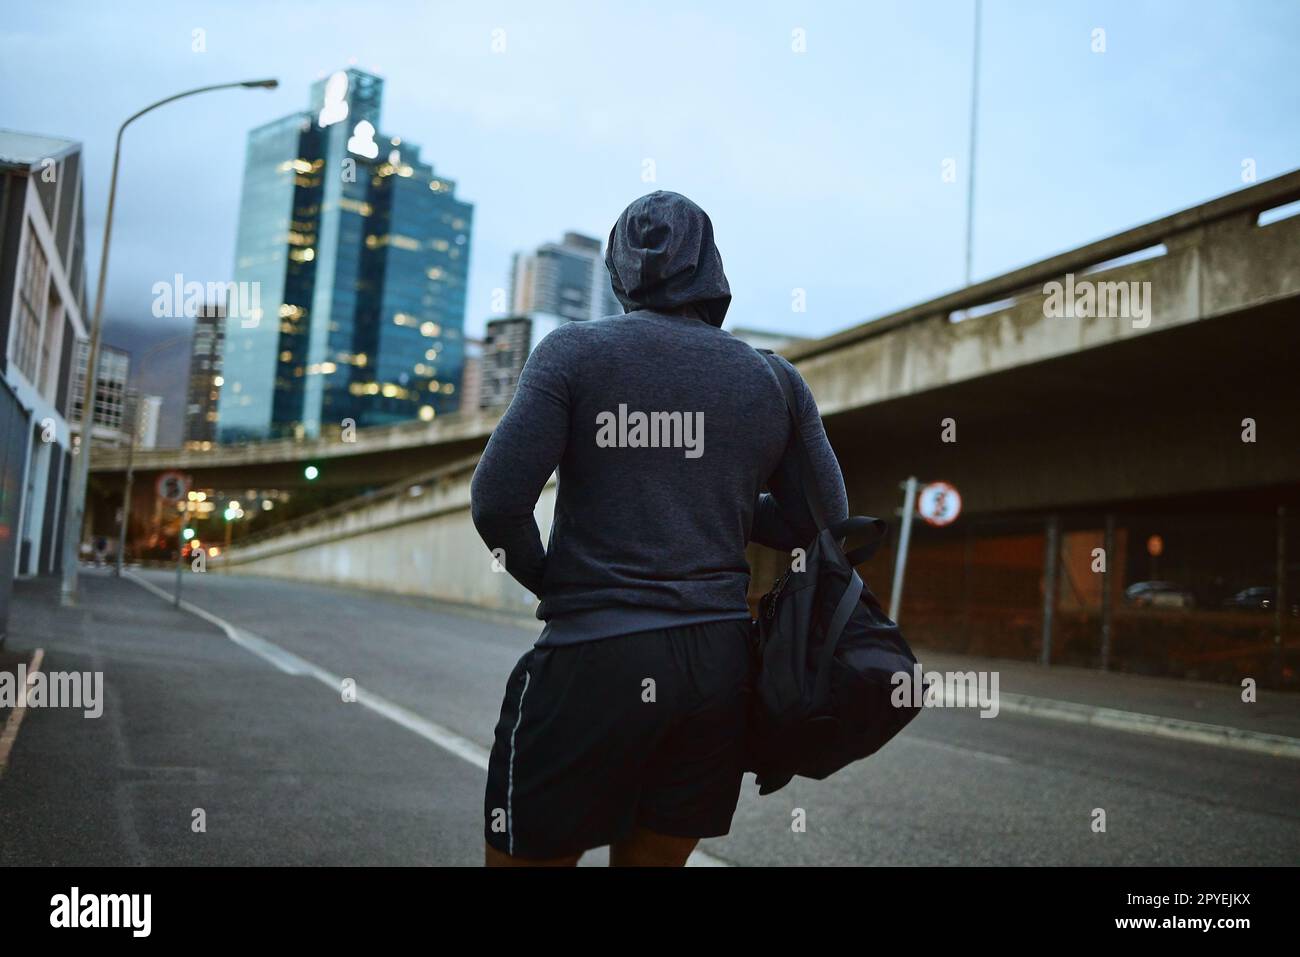 Fitness, running and city with a sports man walking on an asphalt road during an exercise workout. Health, wellness and training with a male runner or athlete in an urban town during the evening Stock Photo